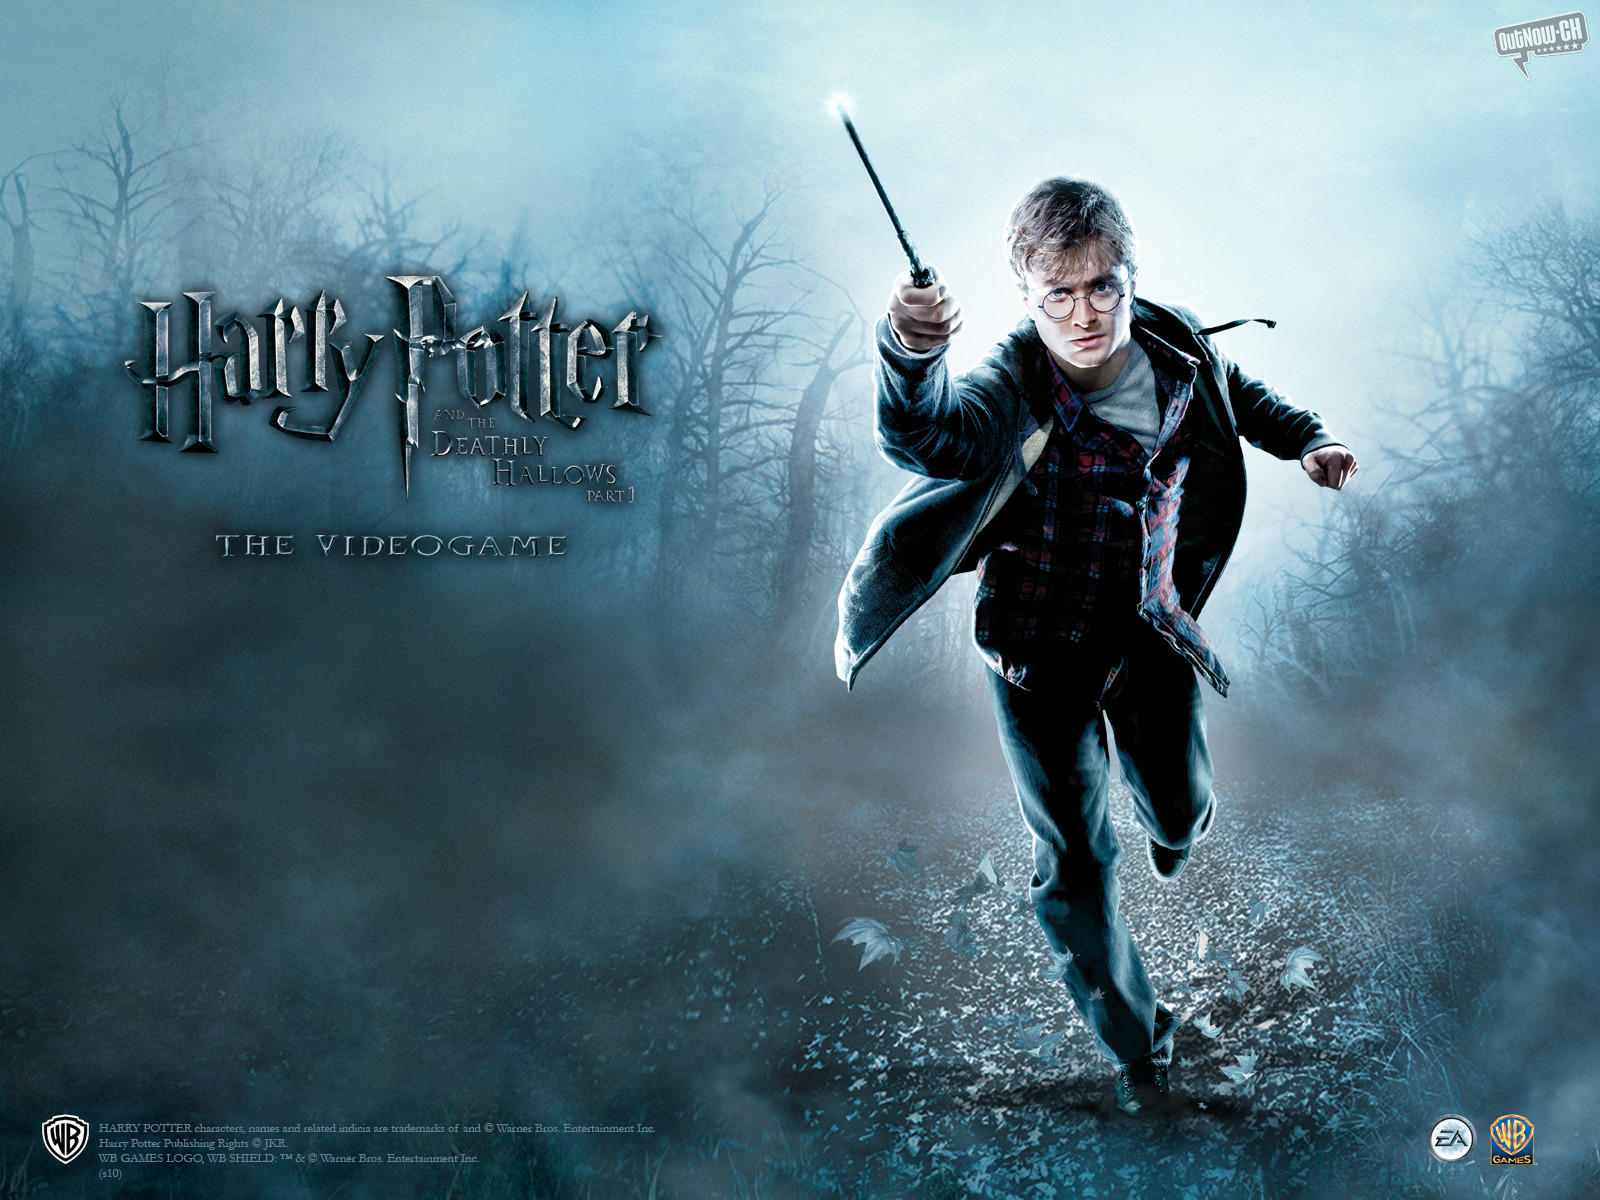 Harry Potter And The Deathly Hallows Game - 1600x1200 Wallpaper 